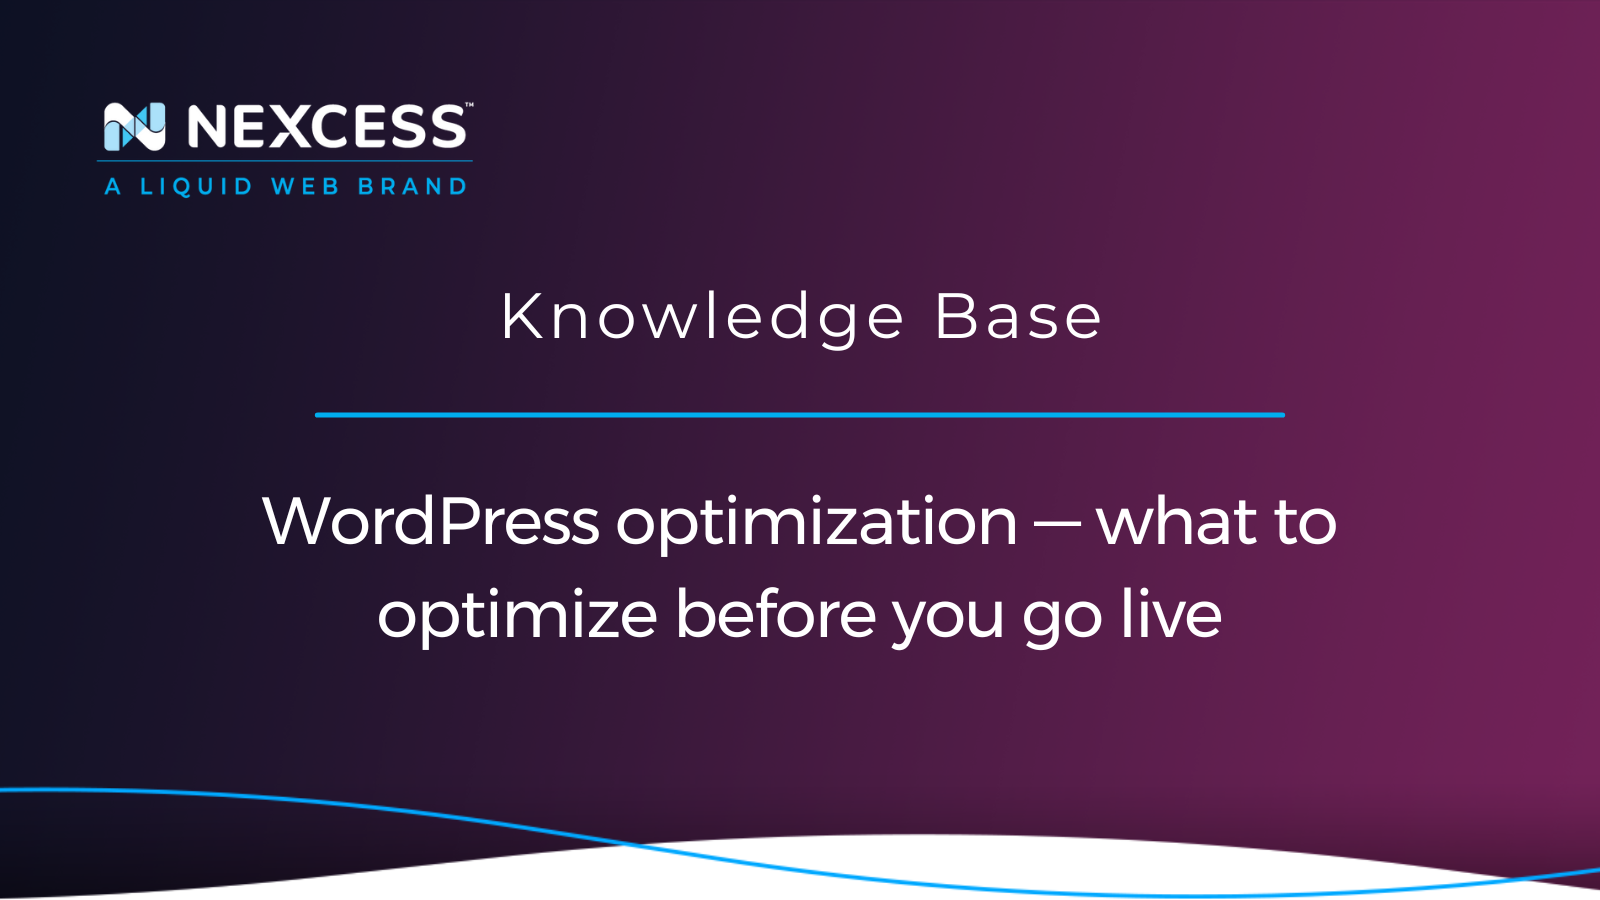 WordPress optimization — what to optimize before you go live